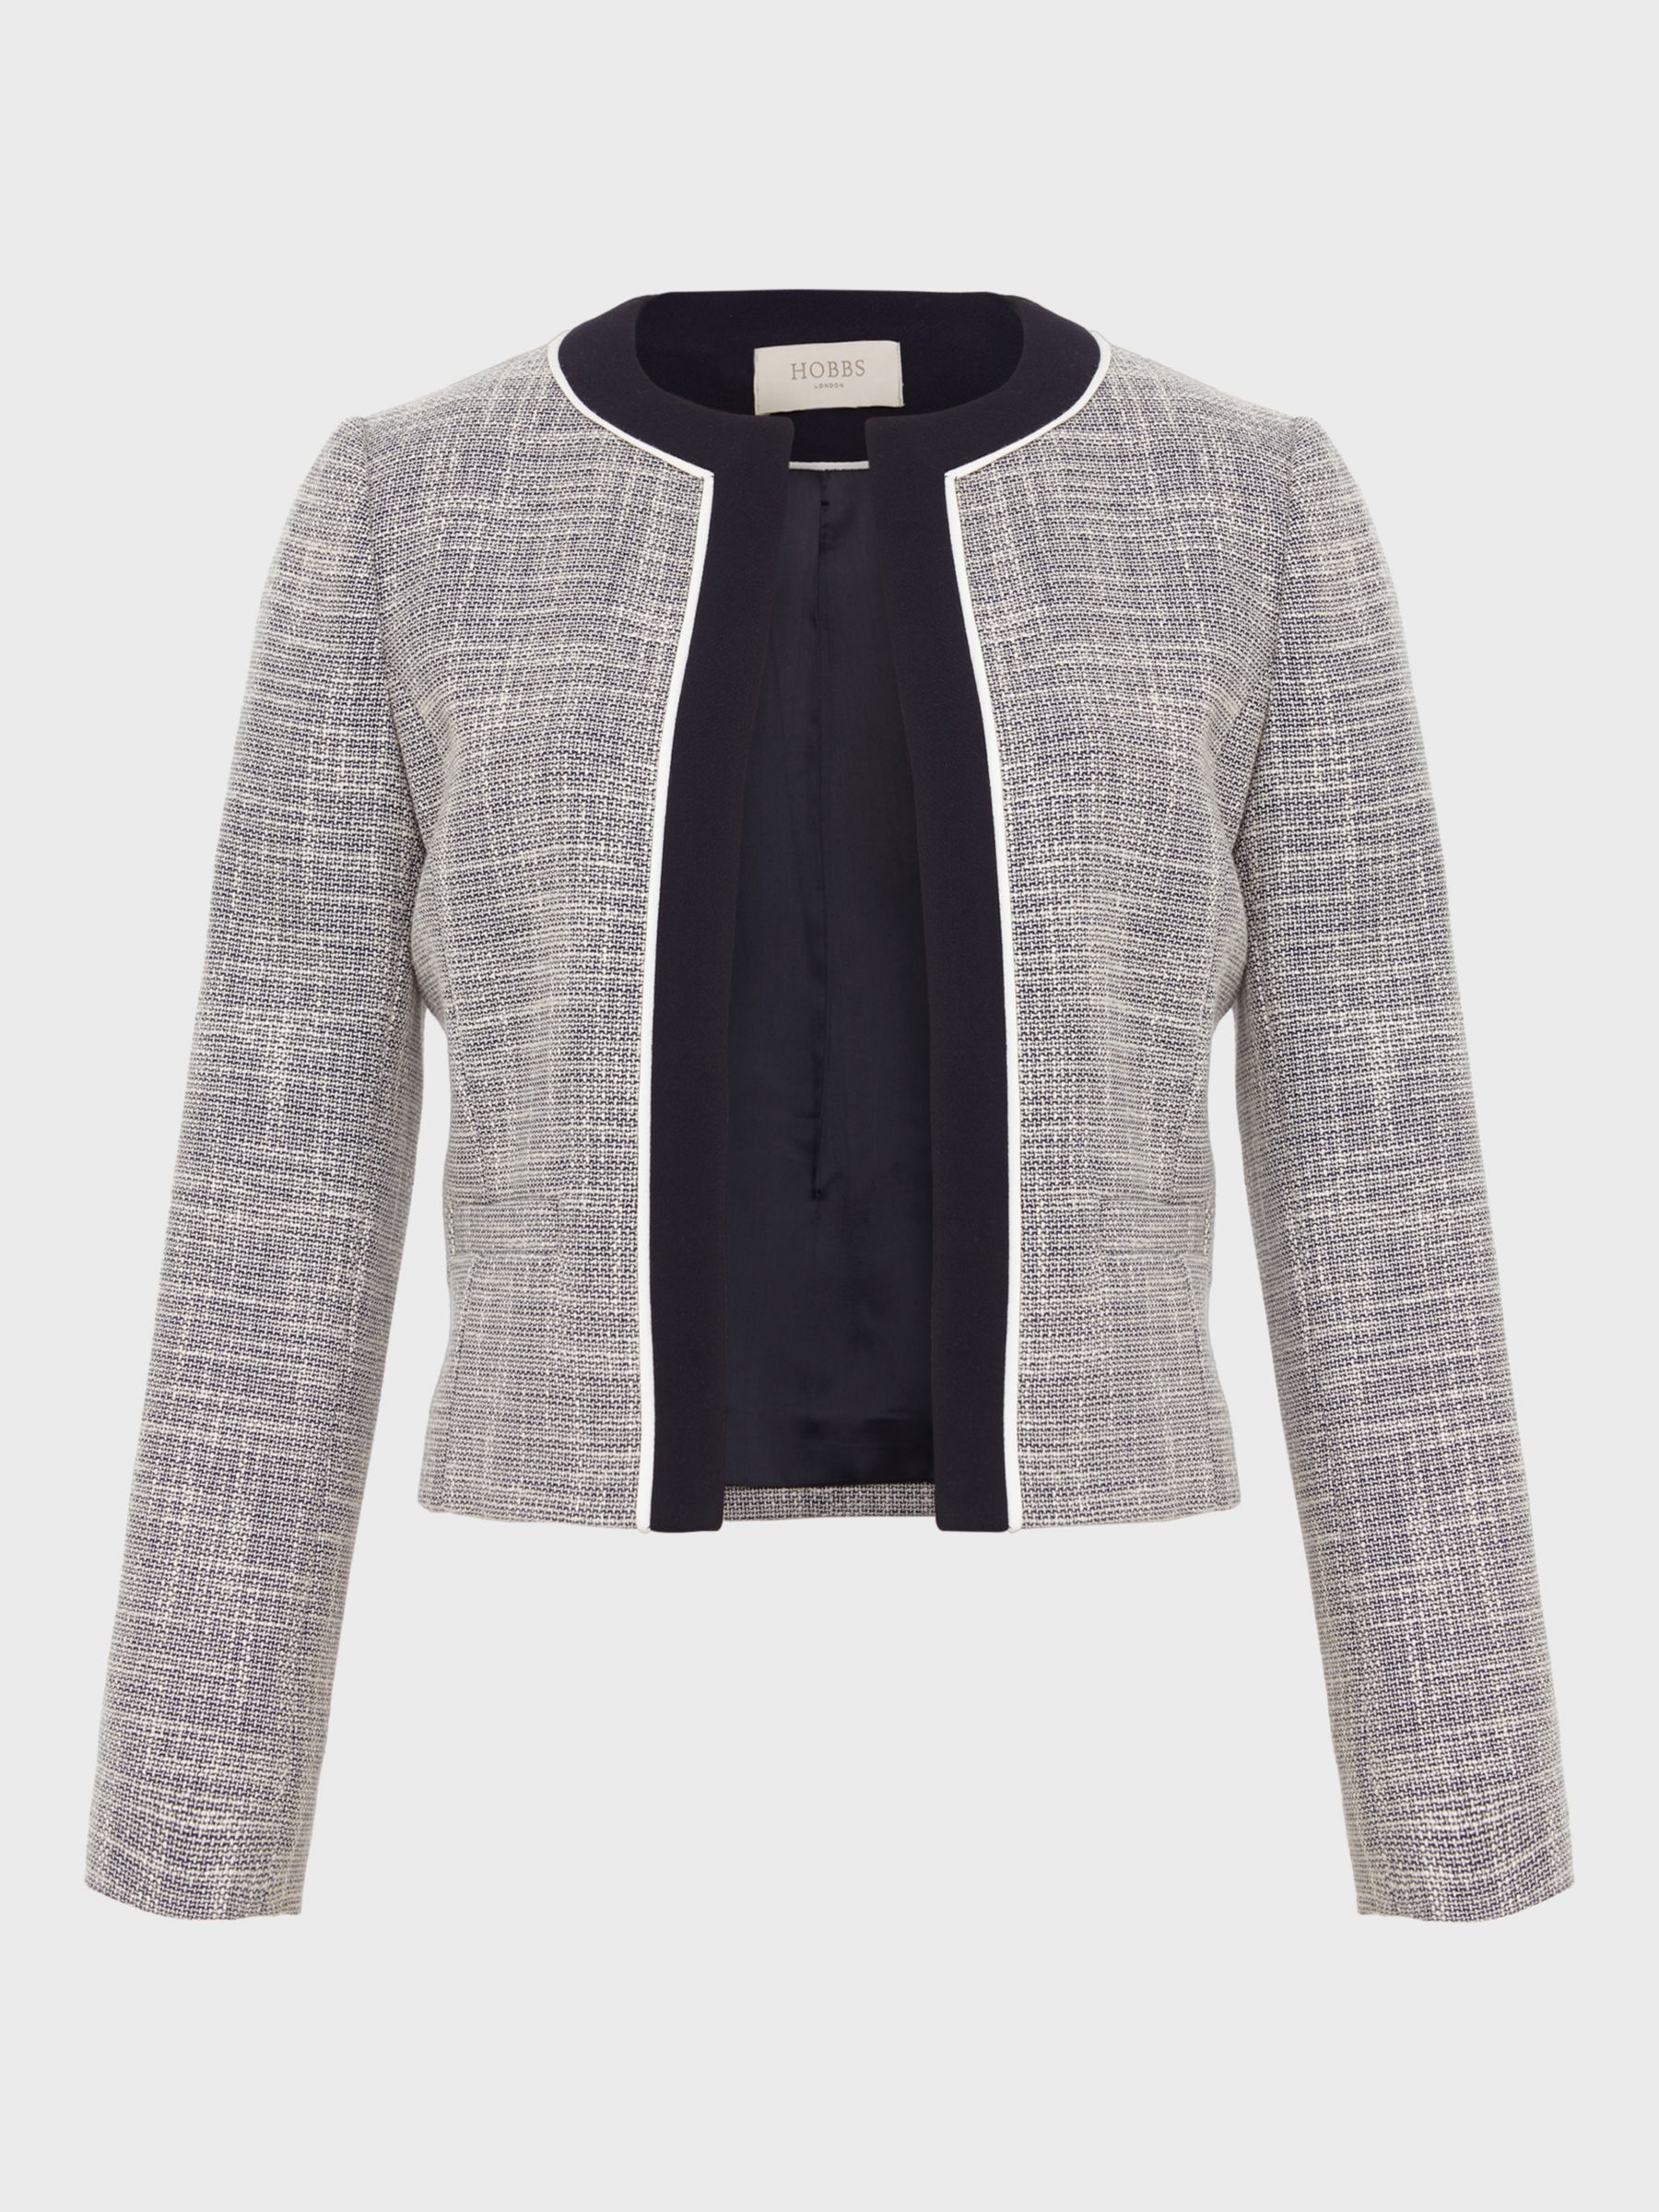 Hobbs Laurie Cropped Blazer, Navy/Ivory at John Lewis & Partners